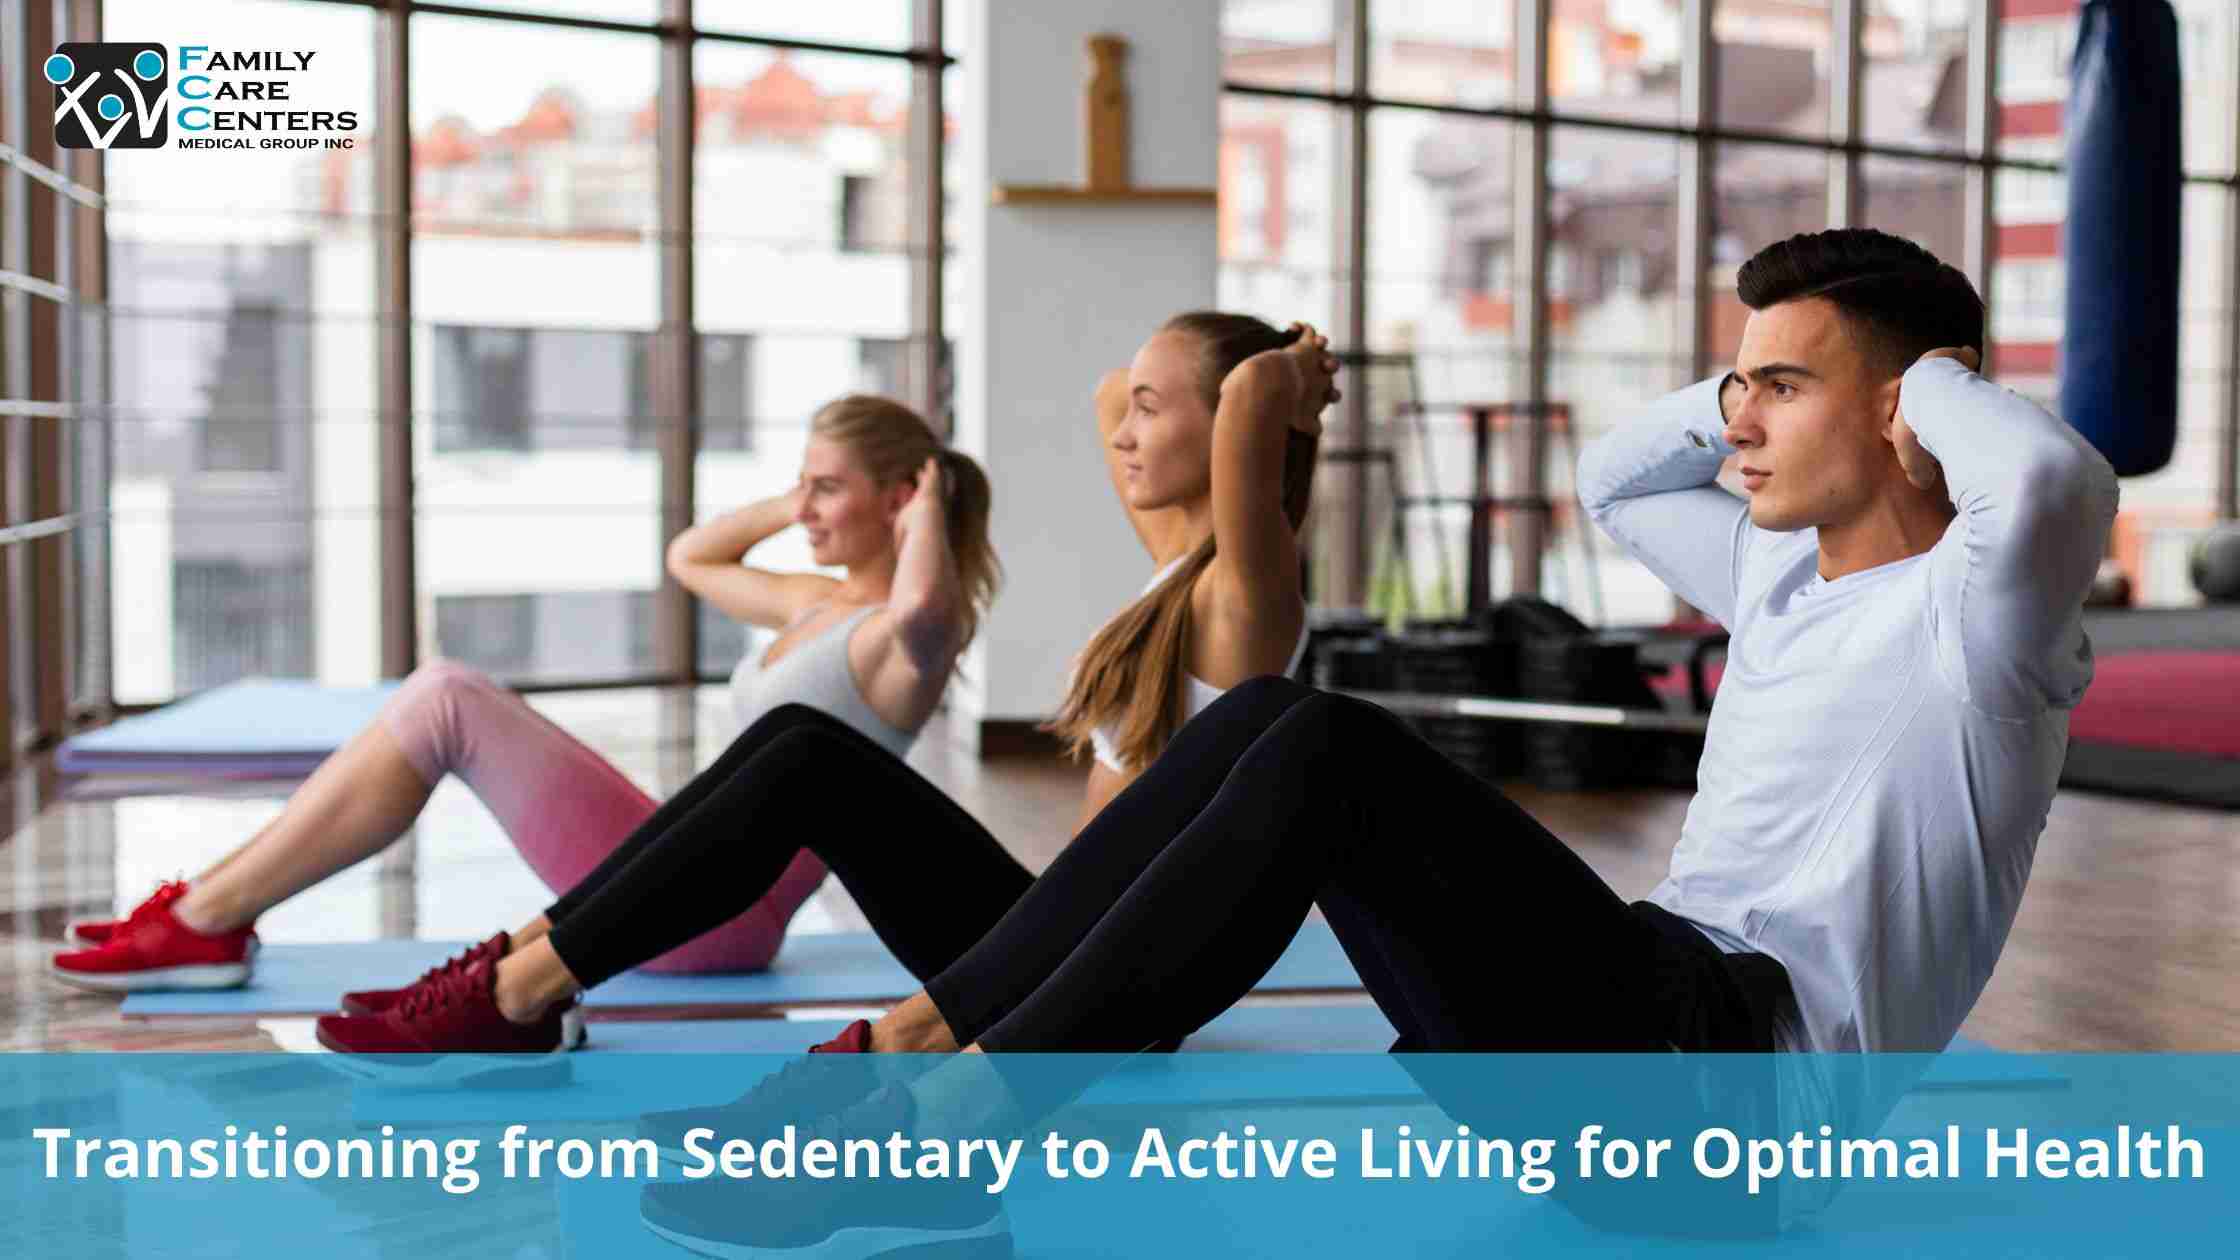 Active Living for Optimal Health